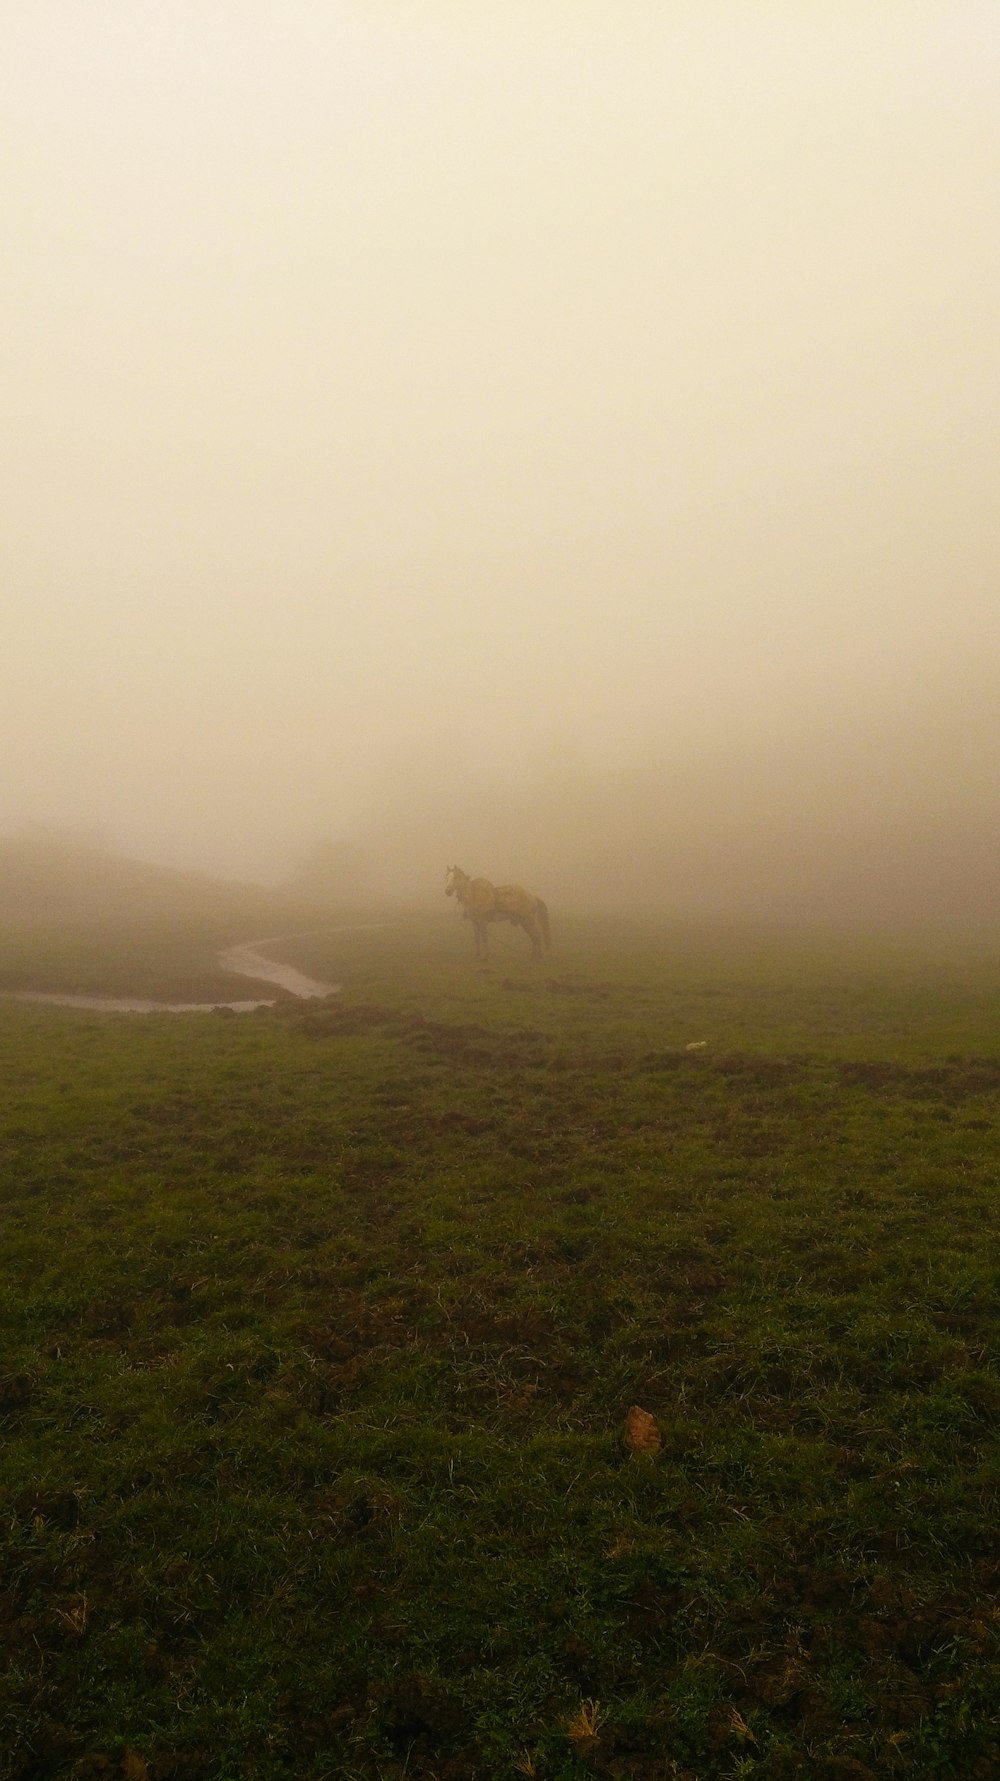 a horse standing in a field on a foggy day